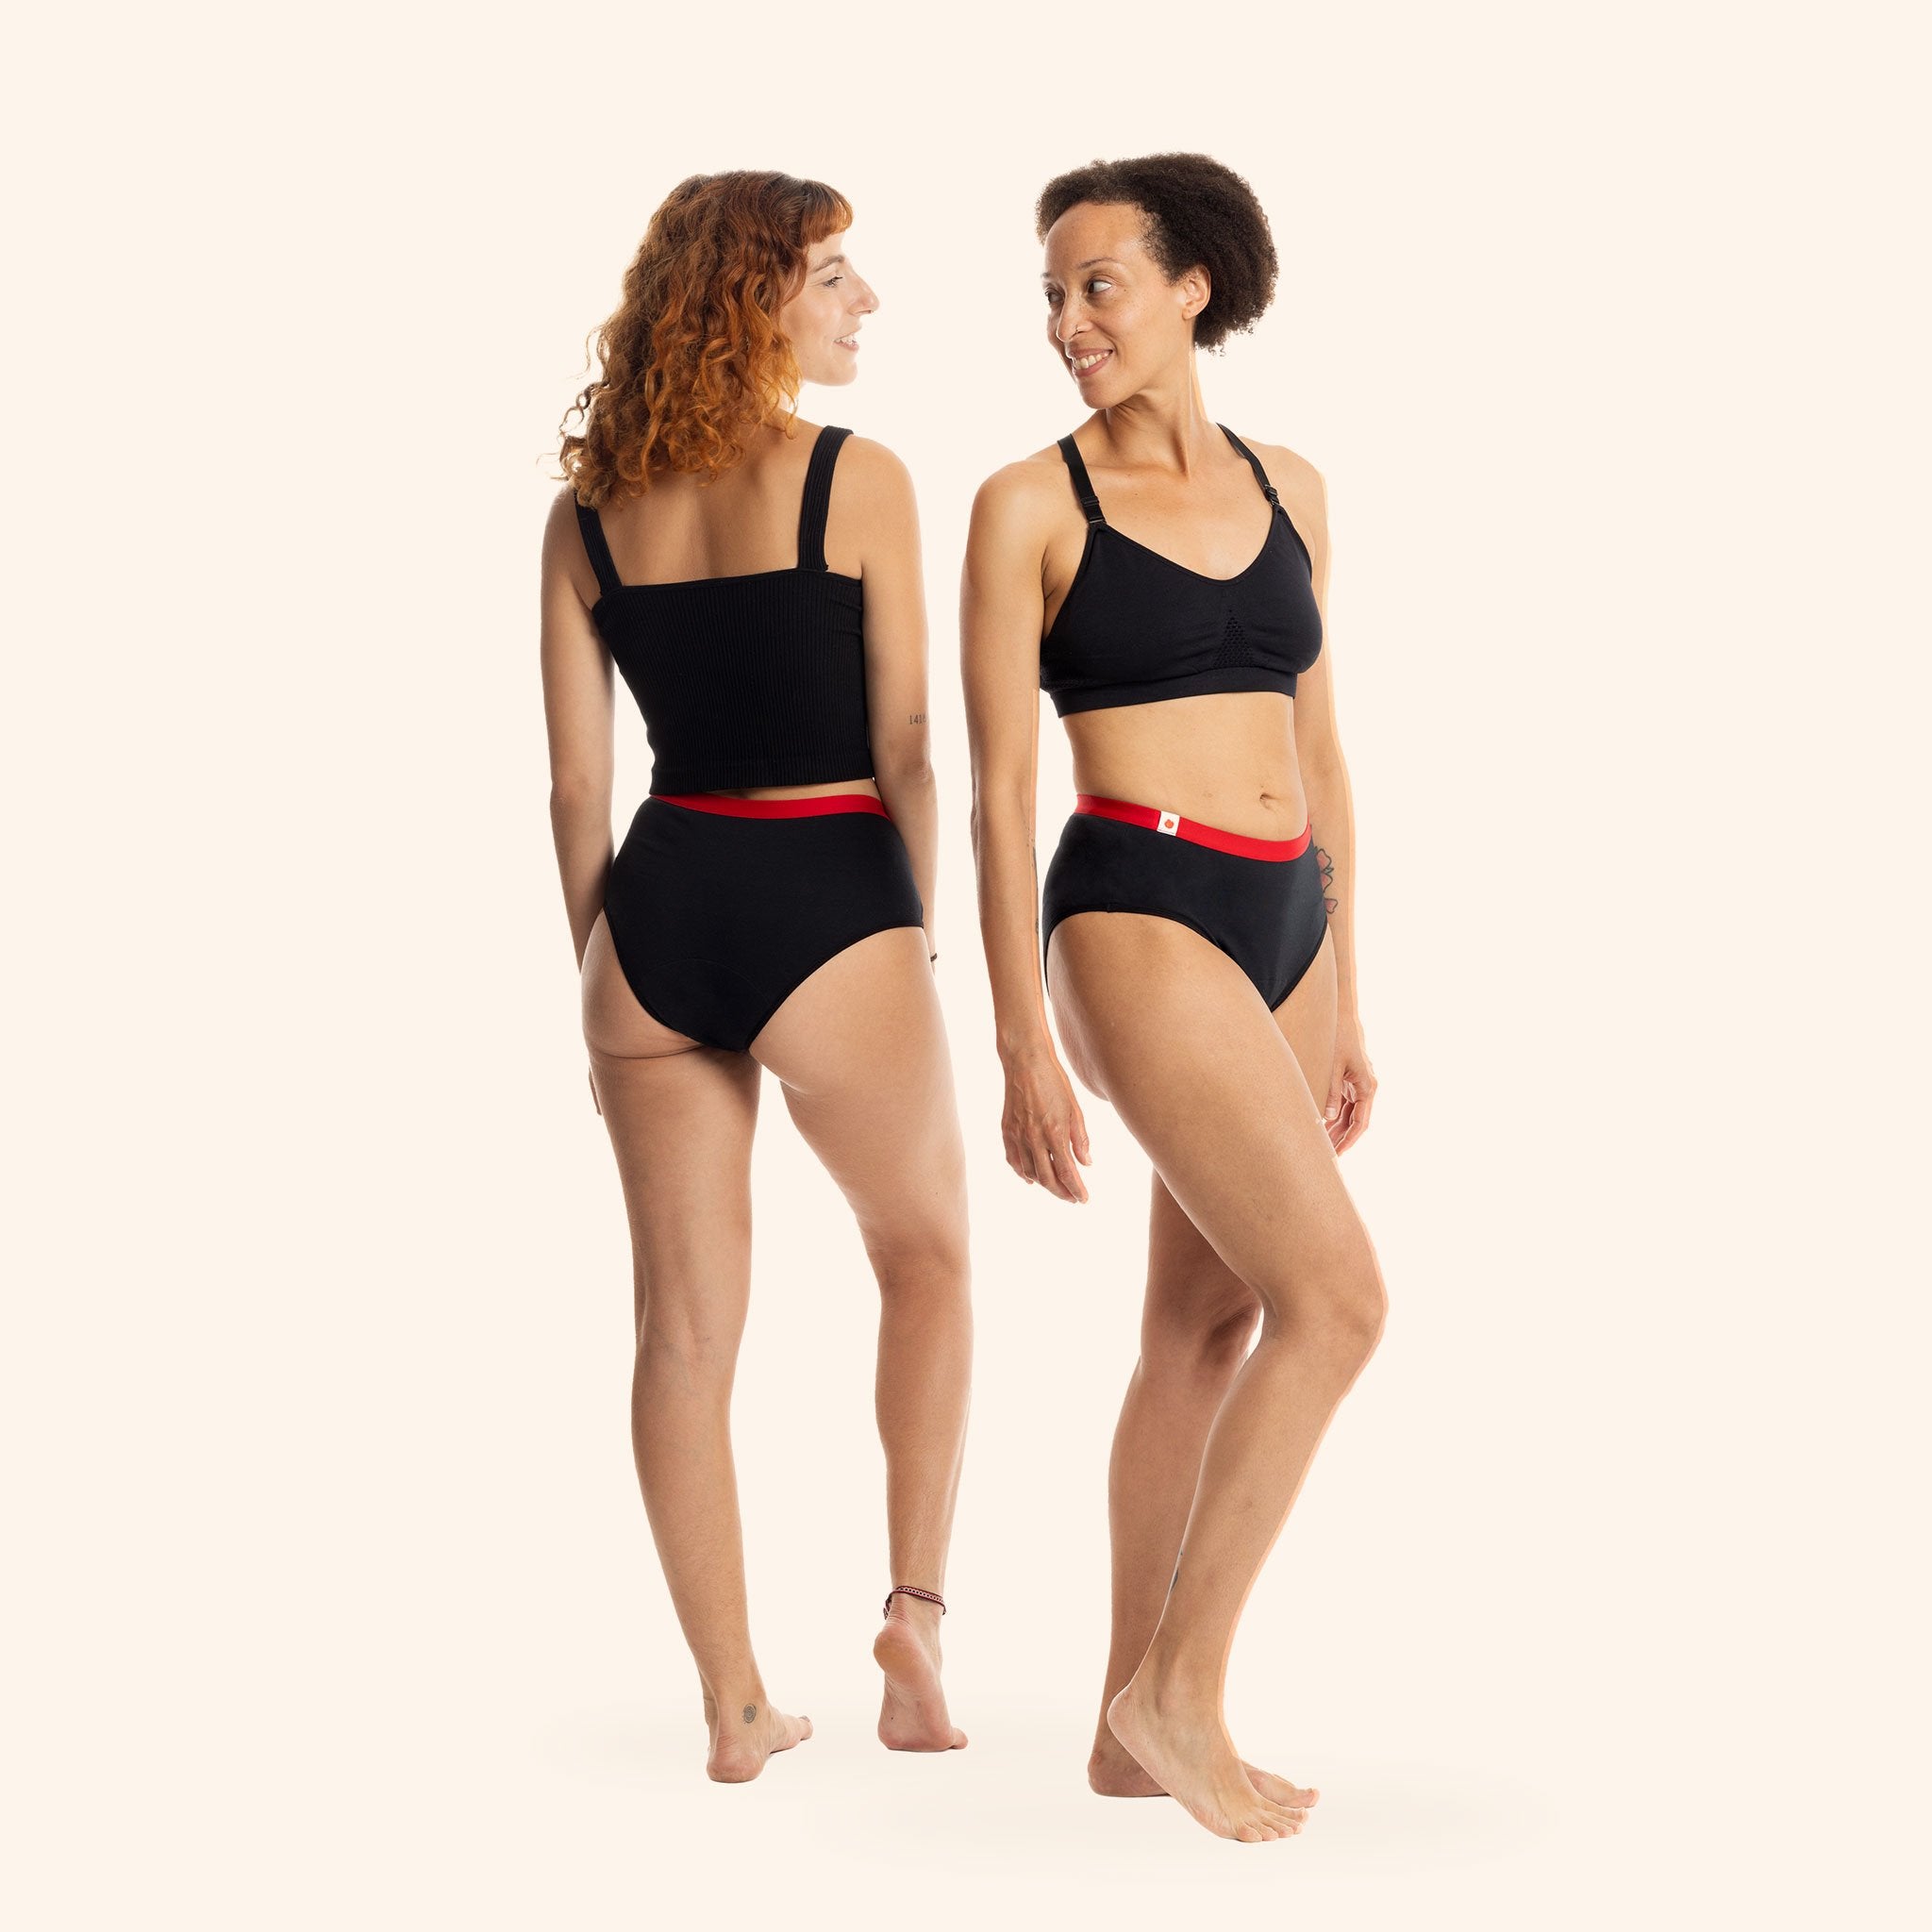 The Highty: Period underwear + 3 removable pads